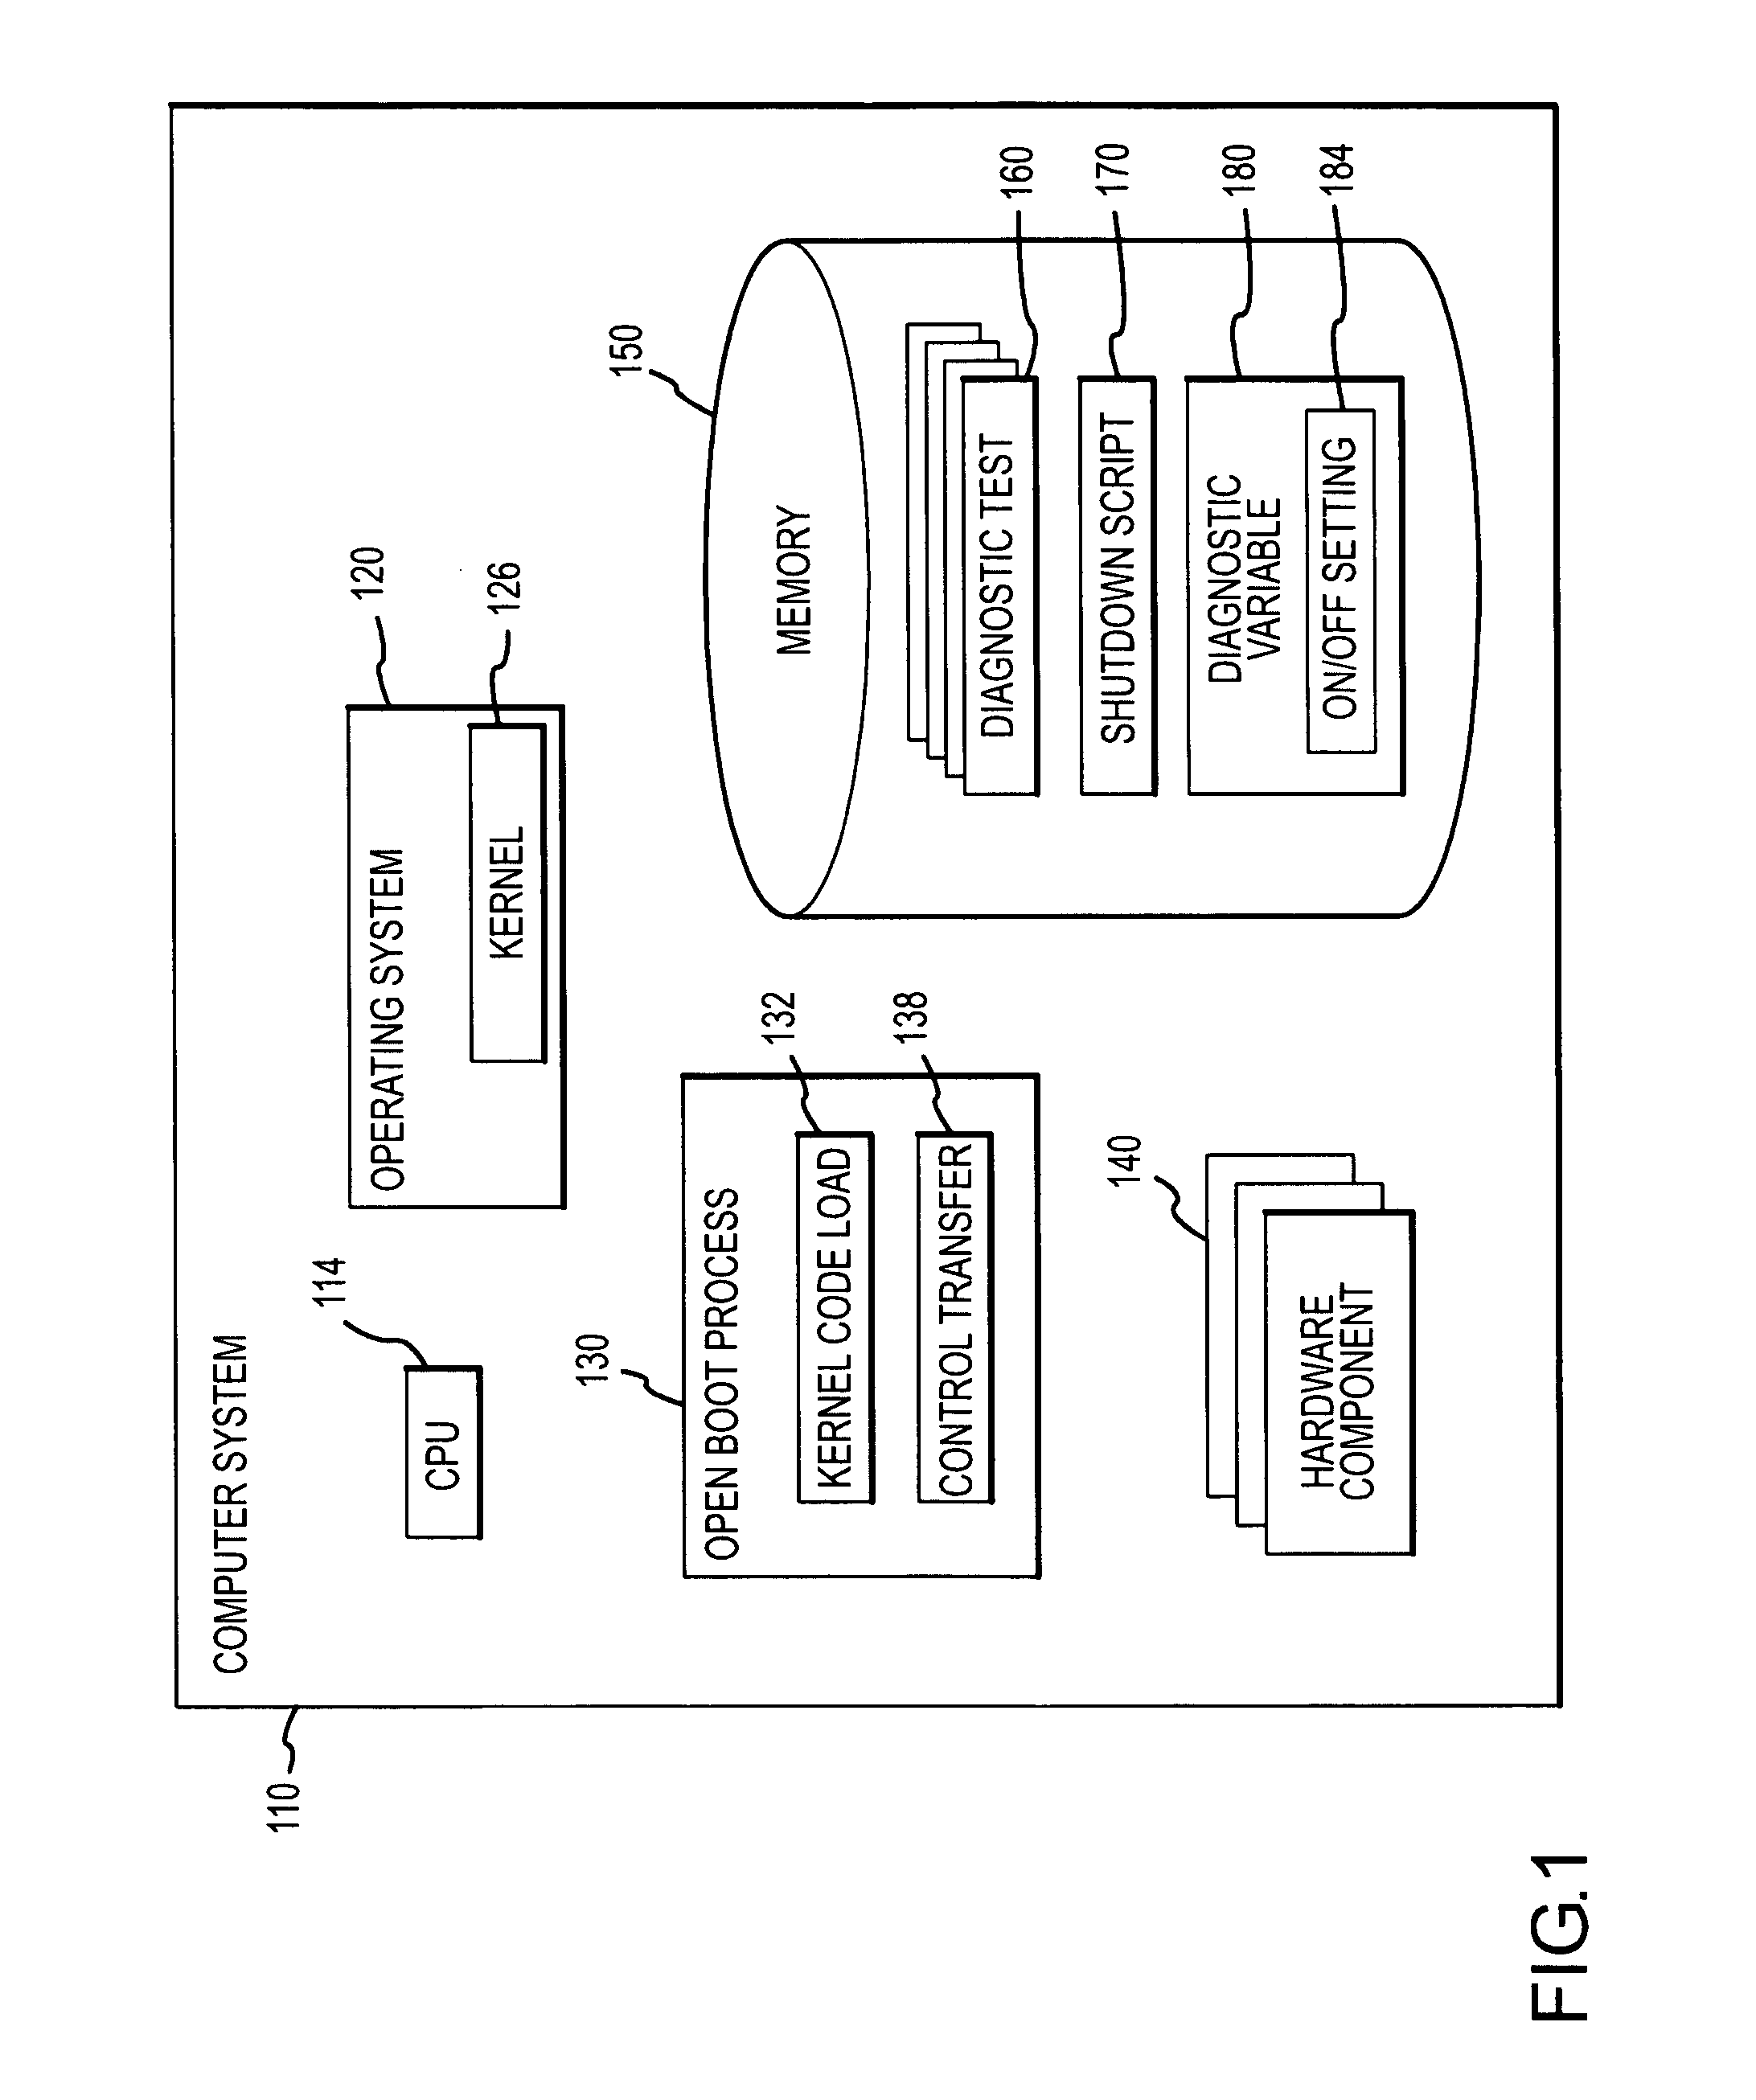 System and method for diagnostic test innovation